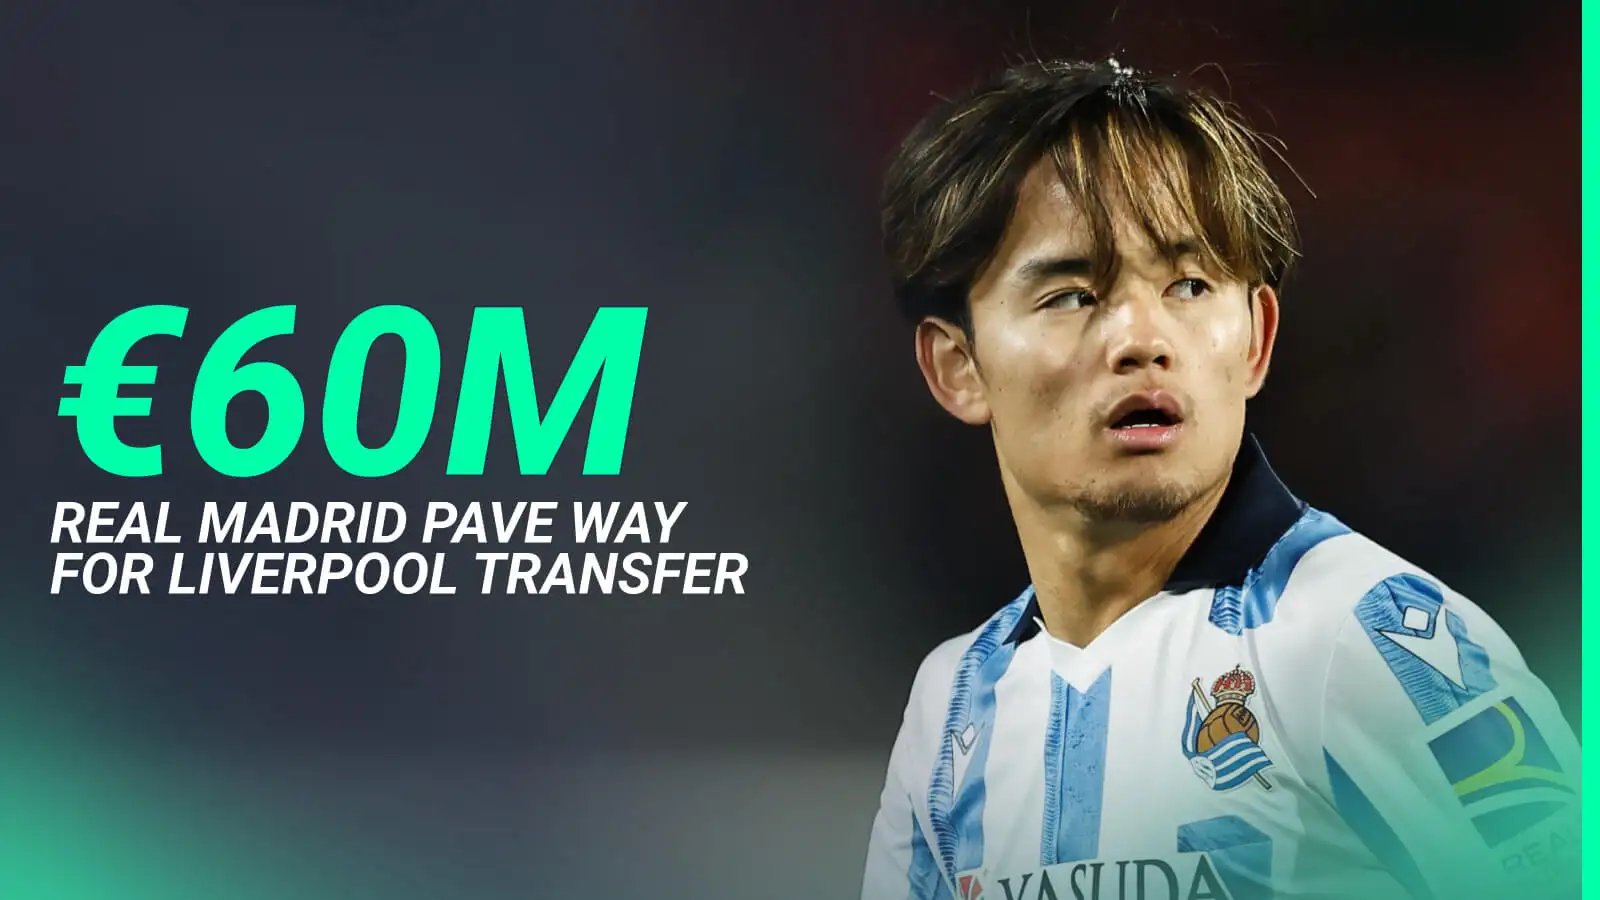 Real Madrid allow Liverpool to make €60m transfer in superb deal that's a win-win for both